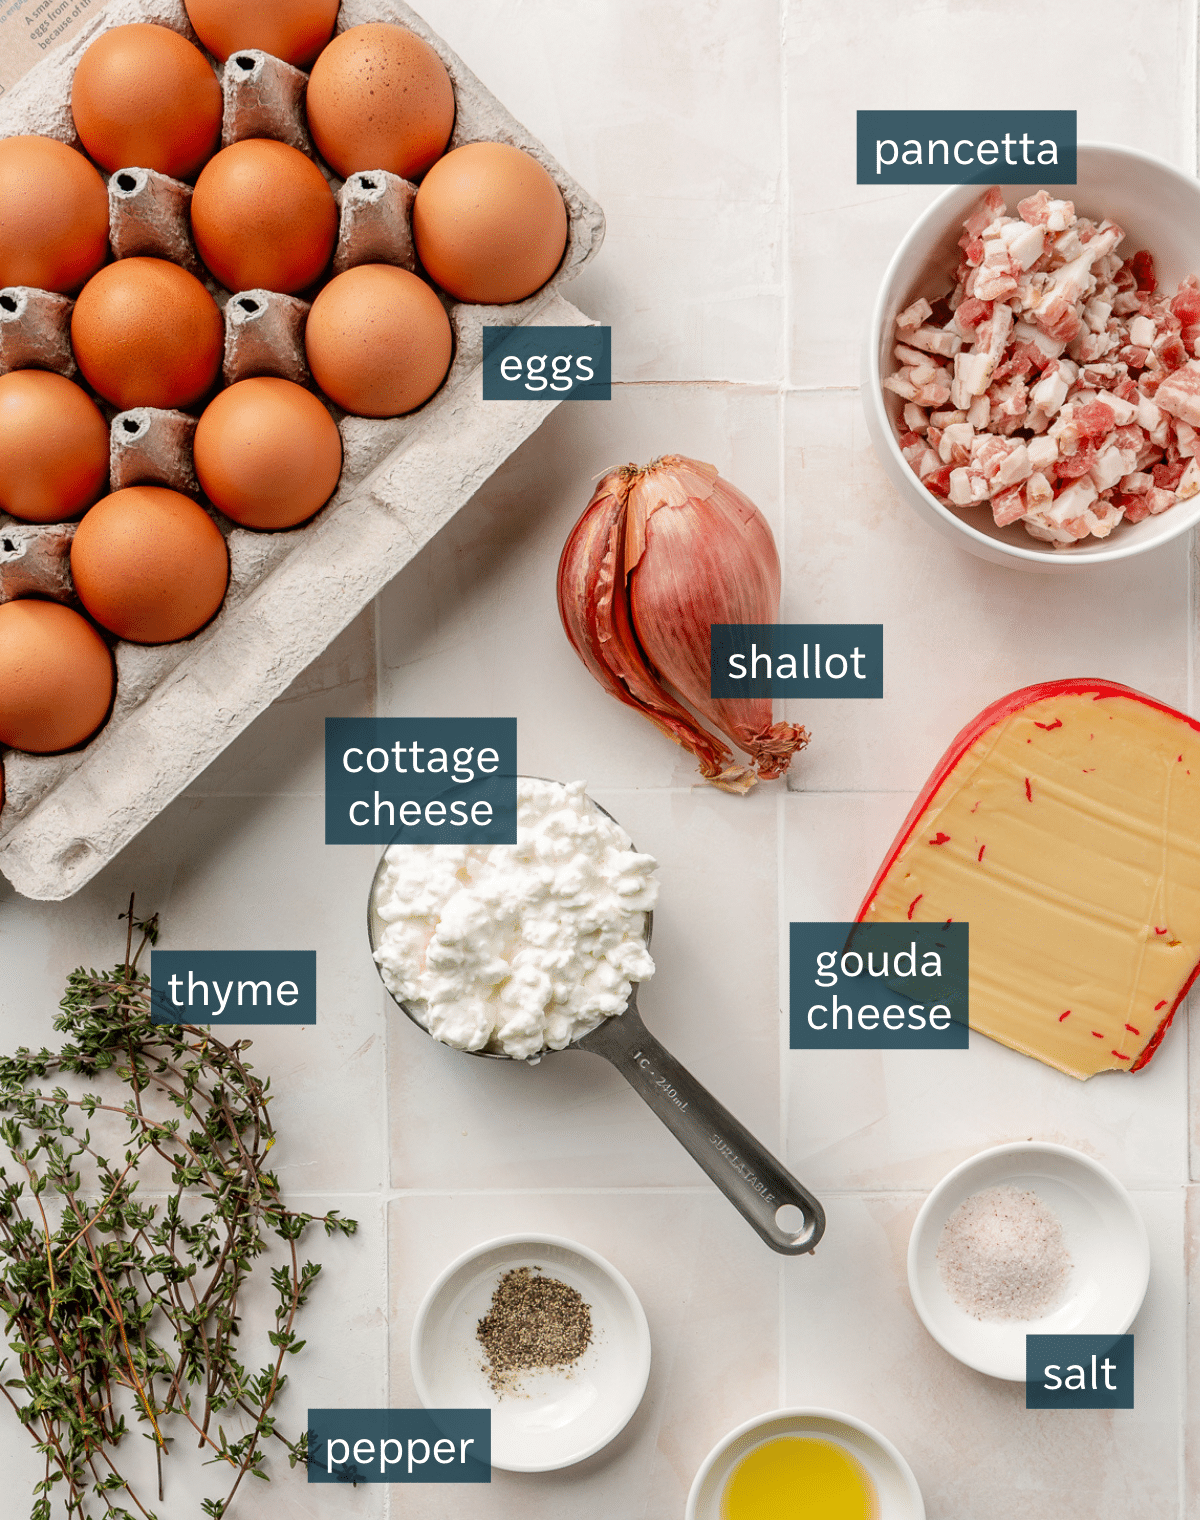 Ingredients for crustless quiche Lorraine sit in a variety of bowls on a white tiled countertop.